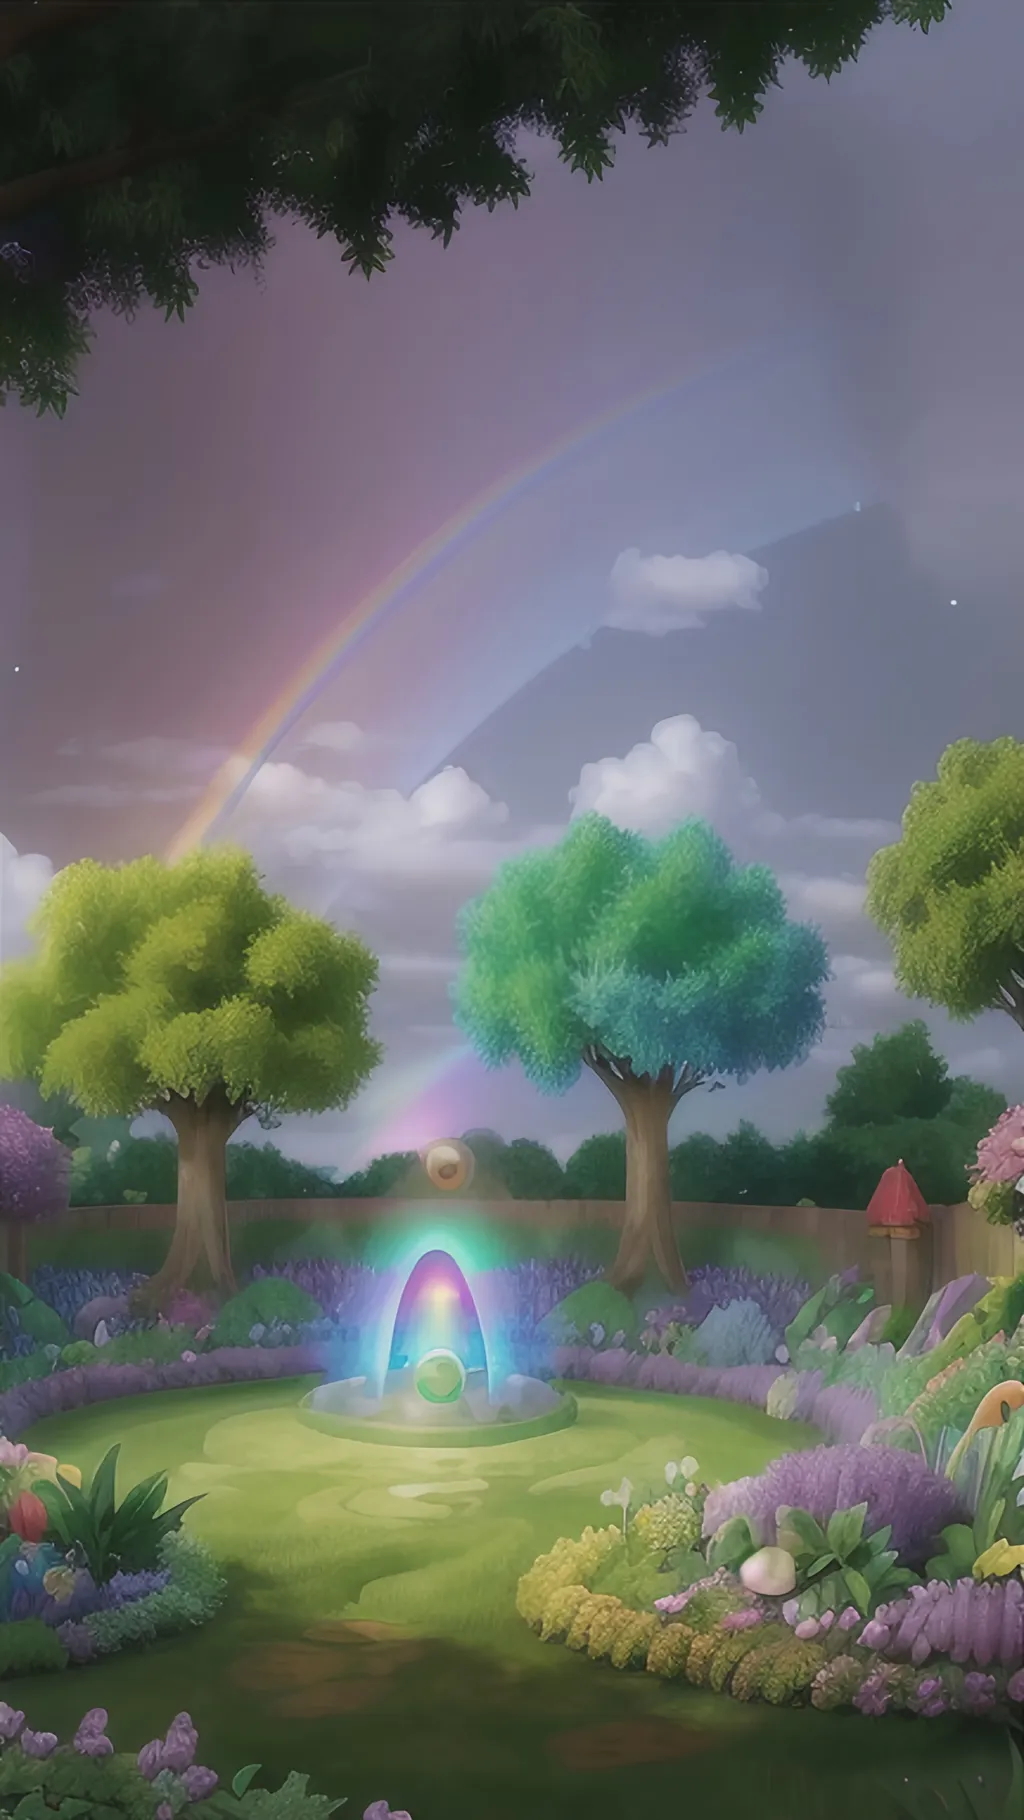 Prompt: The secret of the rainbow garden"

In a hidden corner of the world, there was a garden that was guarded by a rainbow.